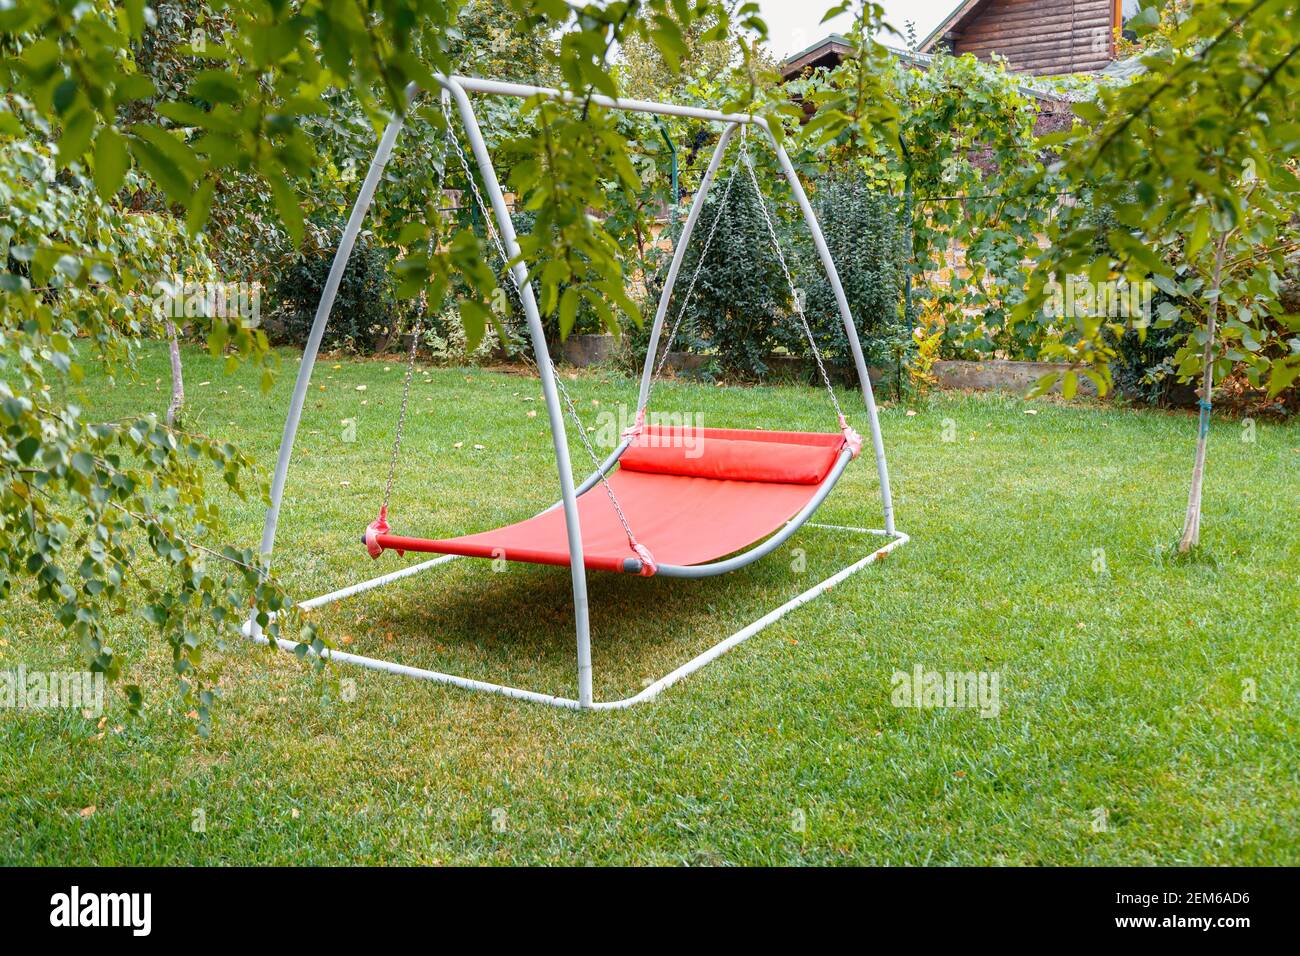 Hammock swing in metal frame with nobody on green lawn in backyard near  house cottage. Rest relax relaxation alone on Red hammock swing in Summer  Stock Photo - Alamy